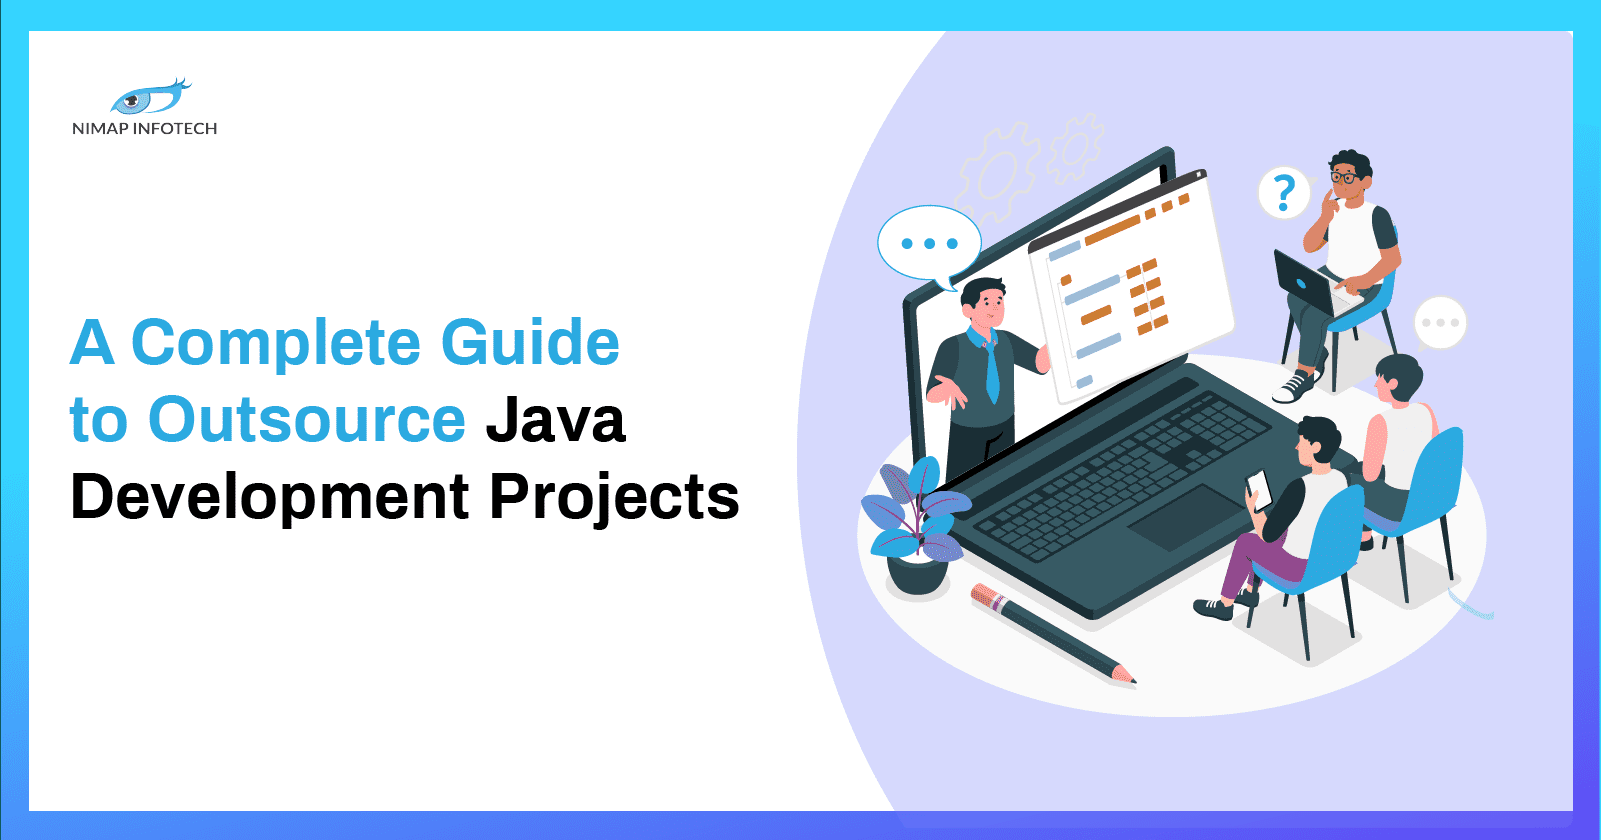 A Complete Guide to Outsource Java Development Projects